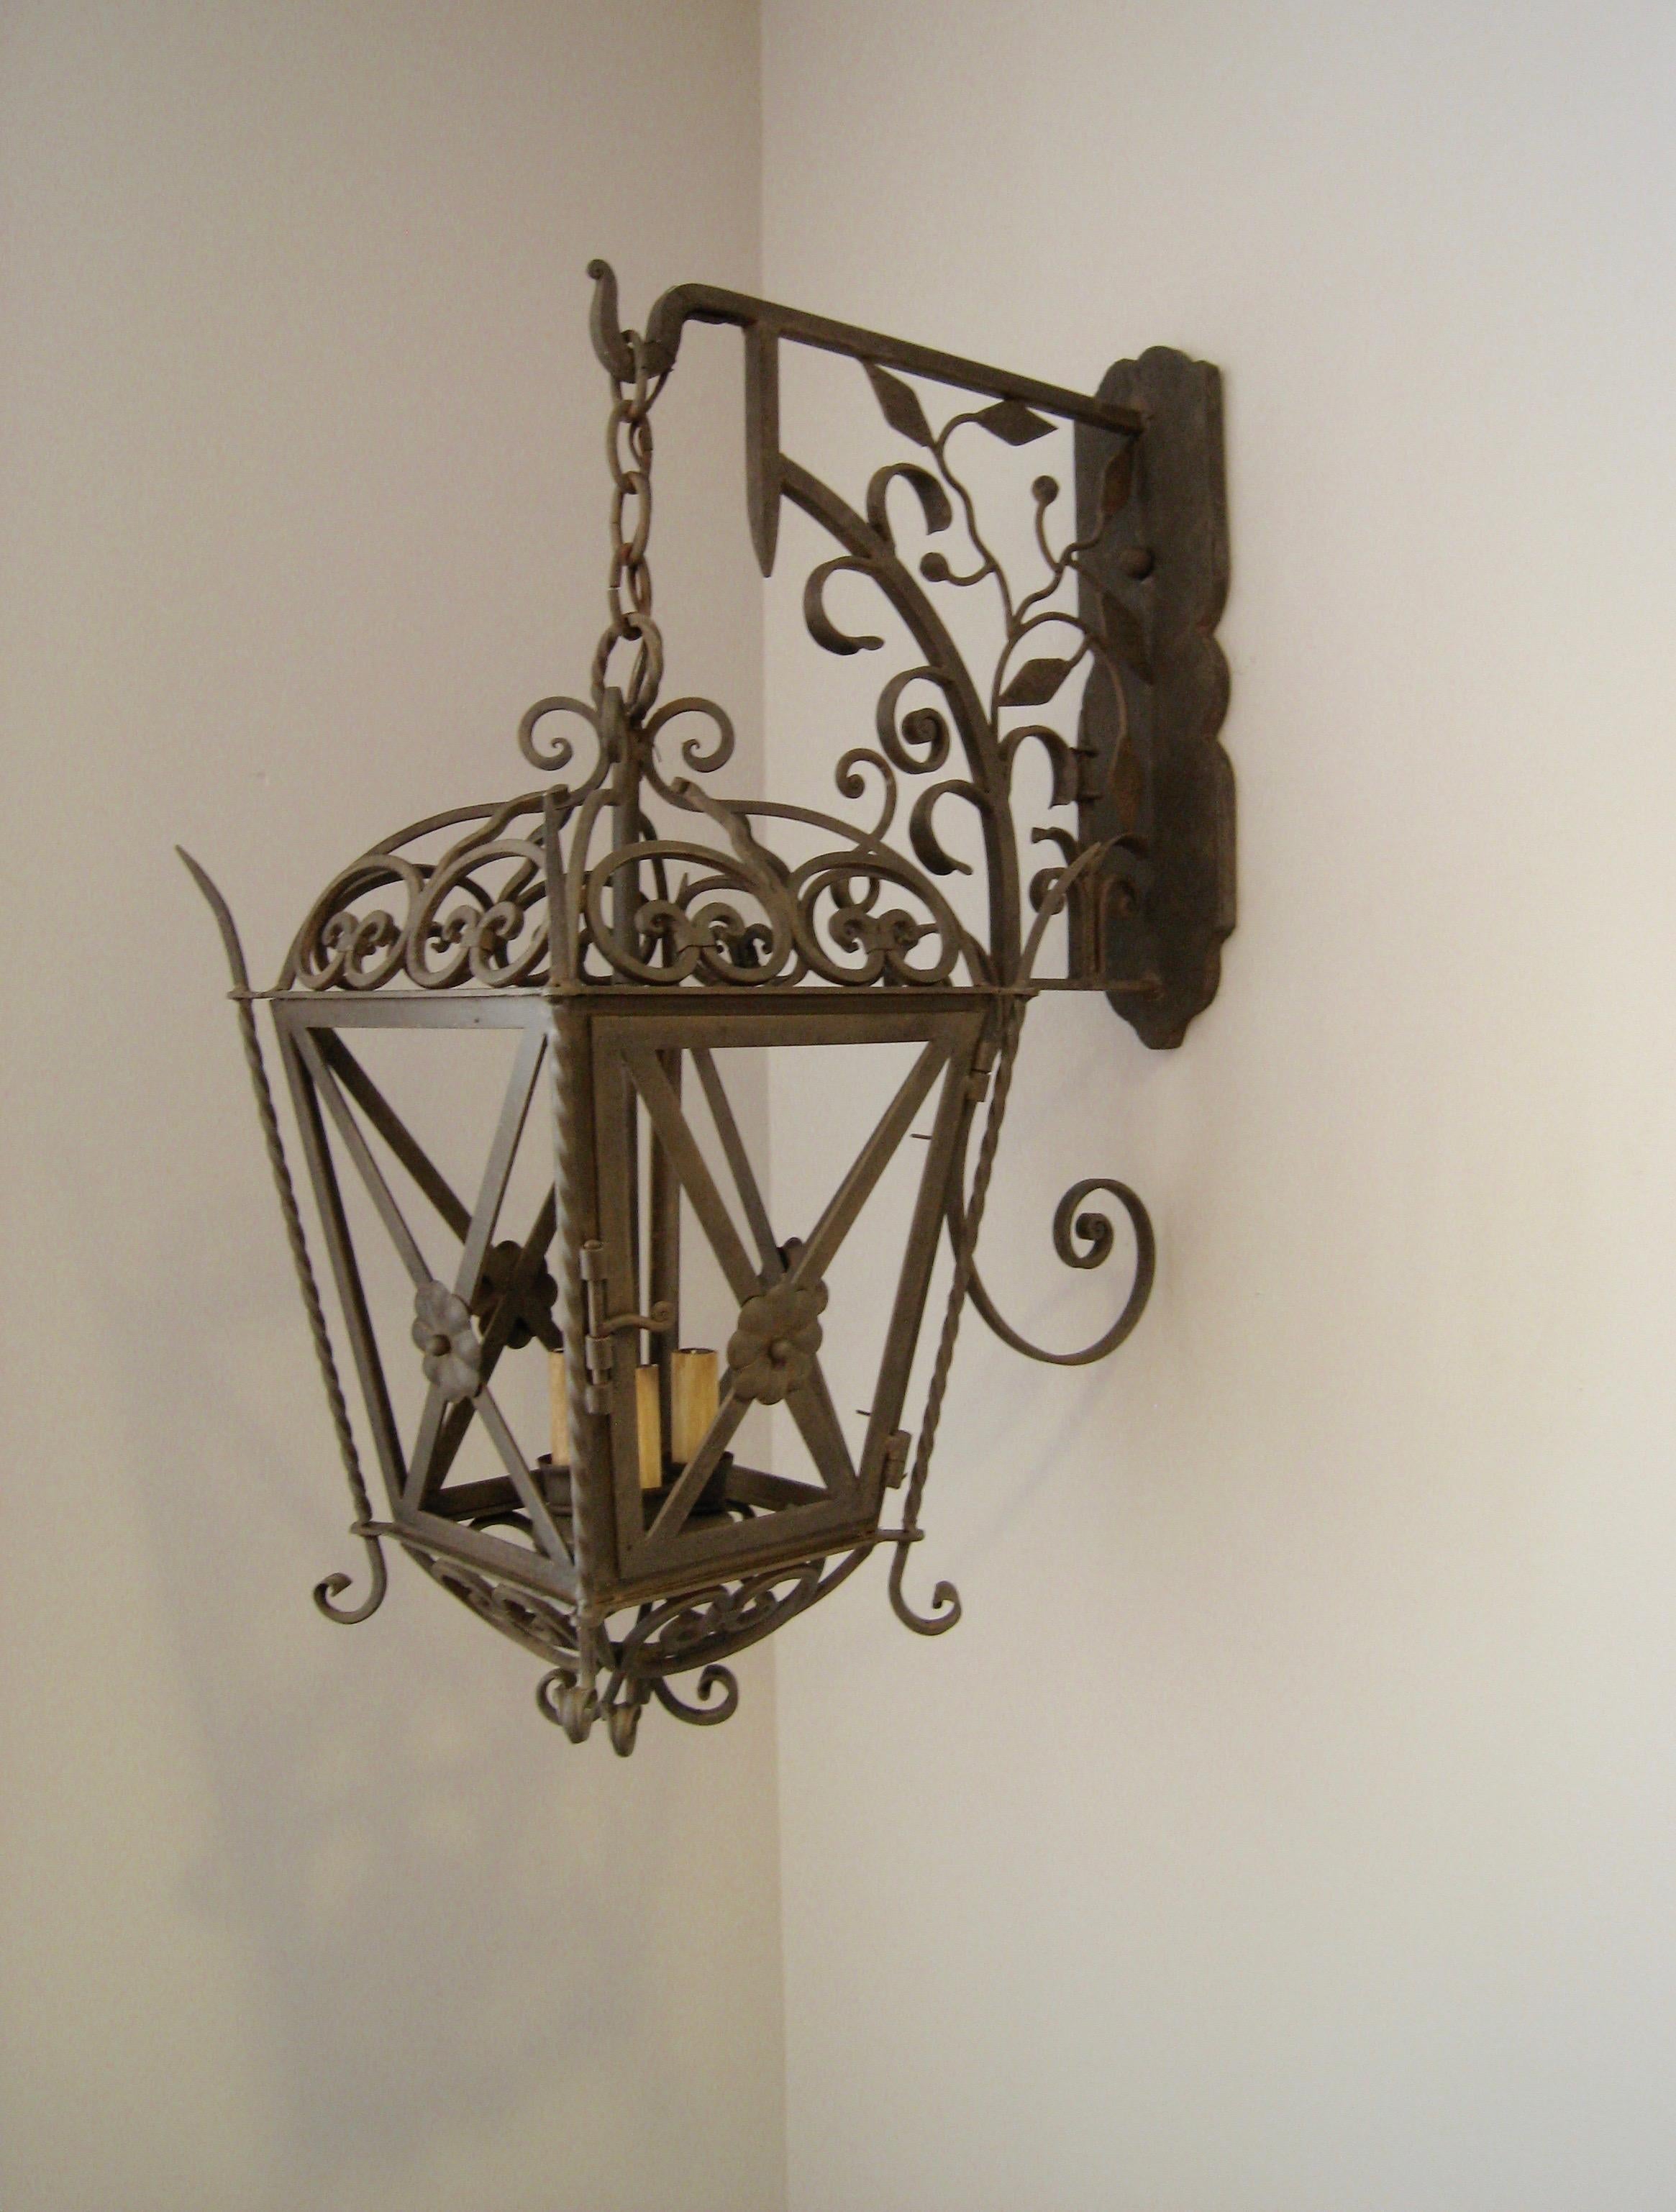 This is our cross and rose lantern on Italian bracket, part of the chandelier product line. The lantern is shown without glass for interior use but requires glass if used for exterior use. Glass options are seeded or clear. Shown in our Antique Rust